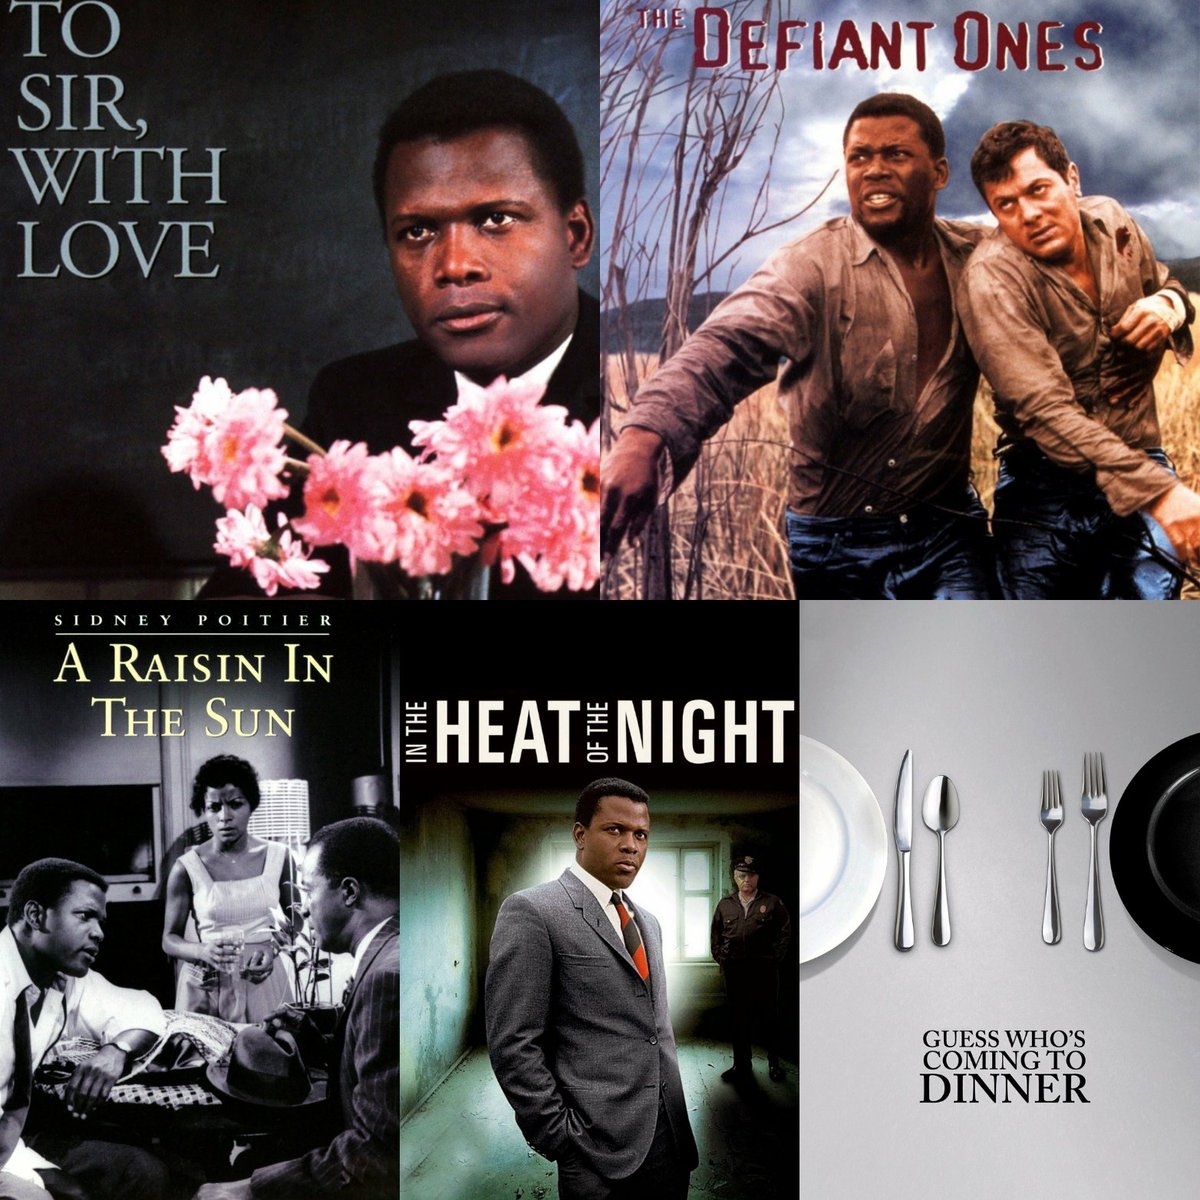 So many of my favorite films from Mr. Poitier released before I was born. Such a blessing to have parents who know good film & share that knowledge w/the kids. 🌠📽🌠📽 #Sidney_Poitier #ToSirWithLove #thedefiantones #GuessWhosComingToDinner #araisininthesun #InTheHeatOfTheNight